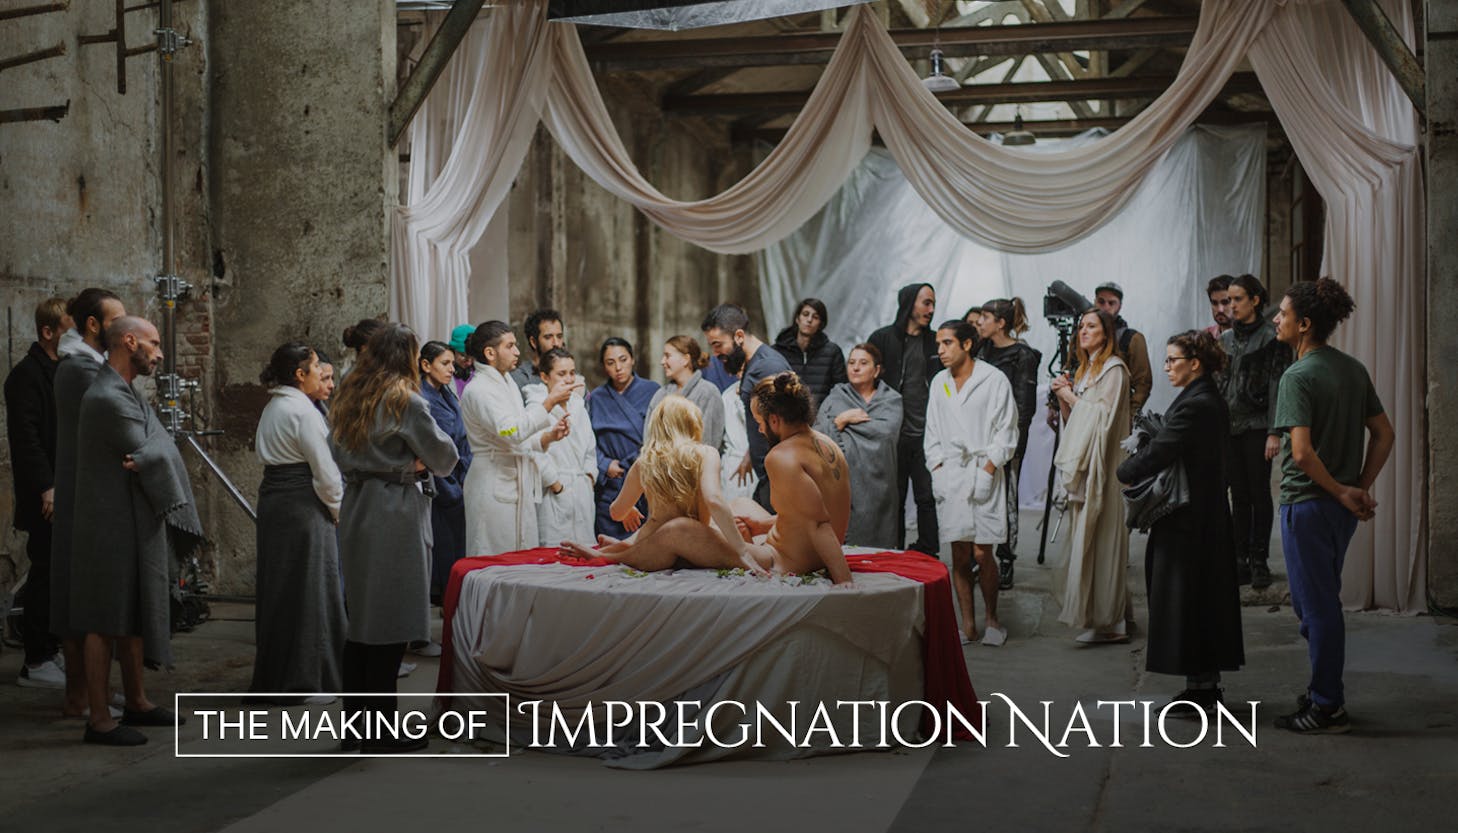 Behind The Scenes: Impregnation Nation